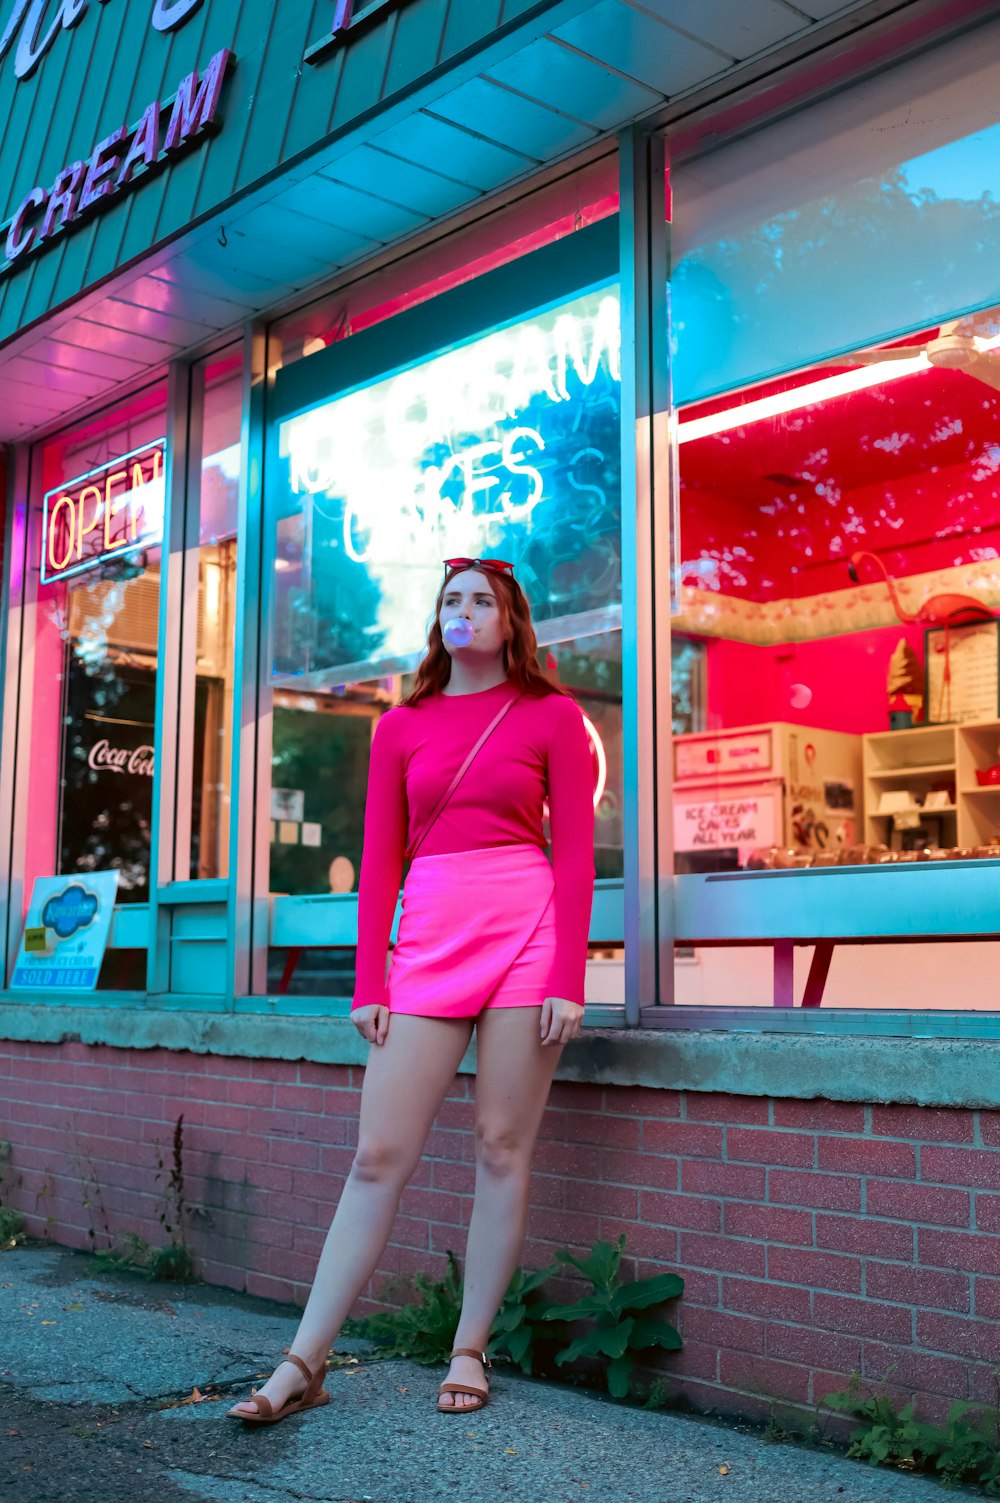 a woman posing in front of a storefront